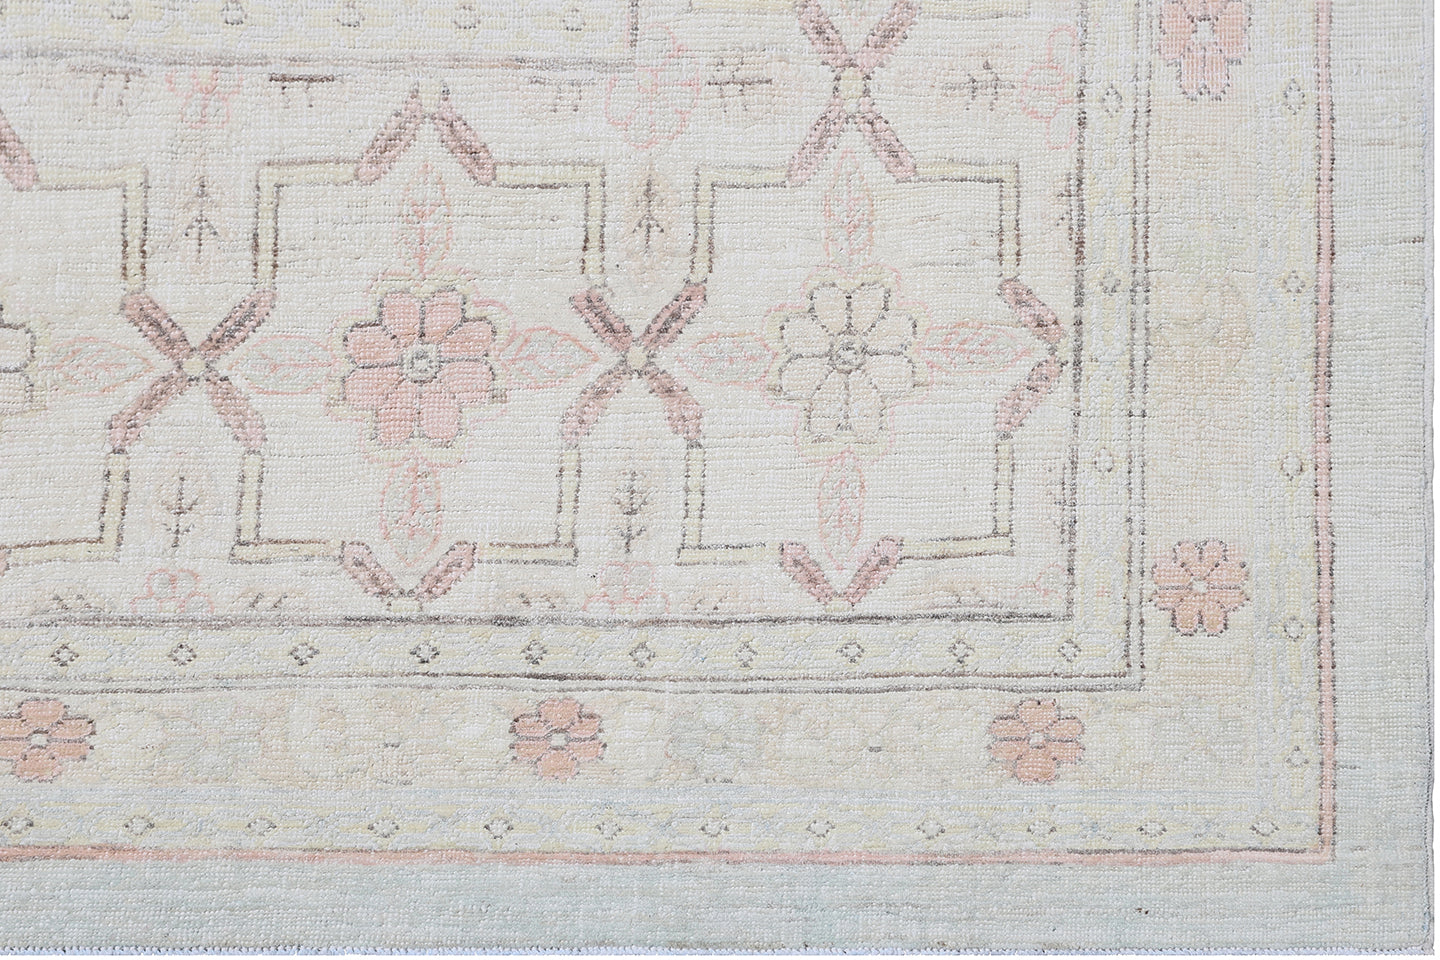 10x13 Very Fine Wool and Silk Icy Blue Aqua Pink Ivory White Tabriz Design Ariana Luxury Collection Rug